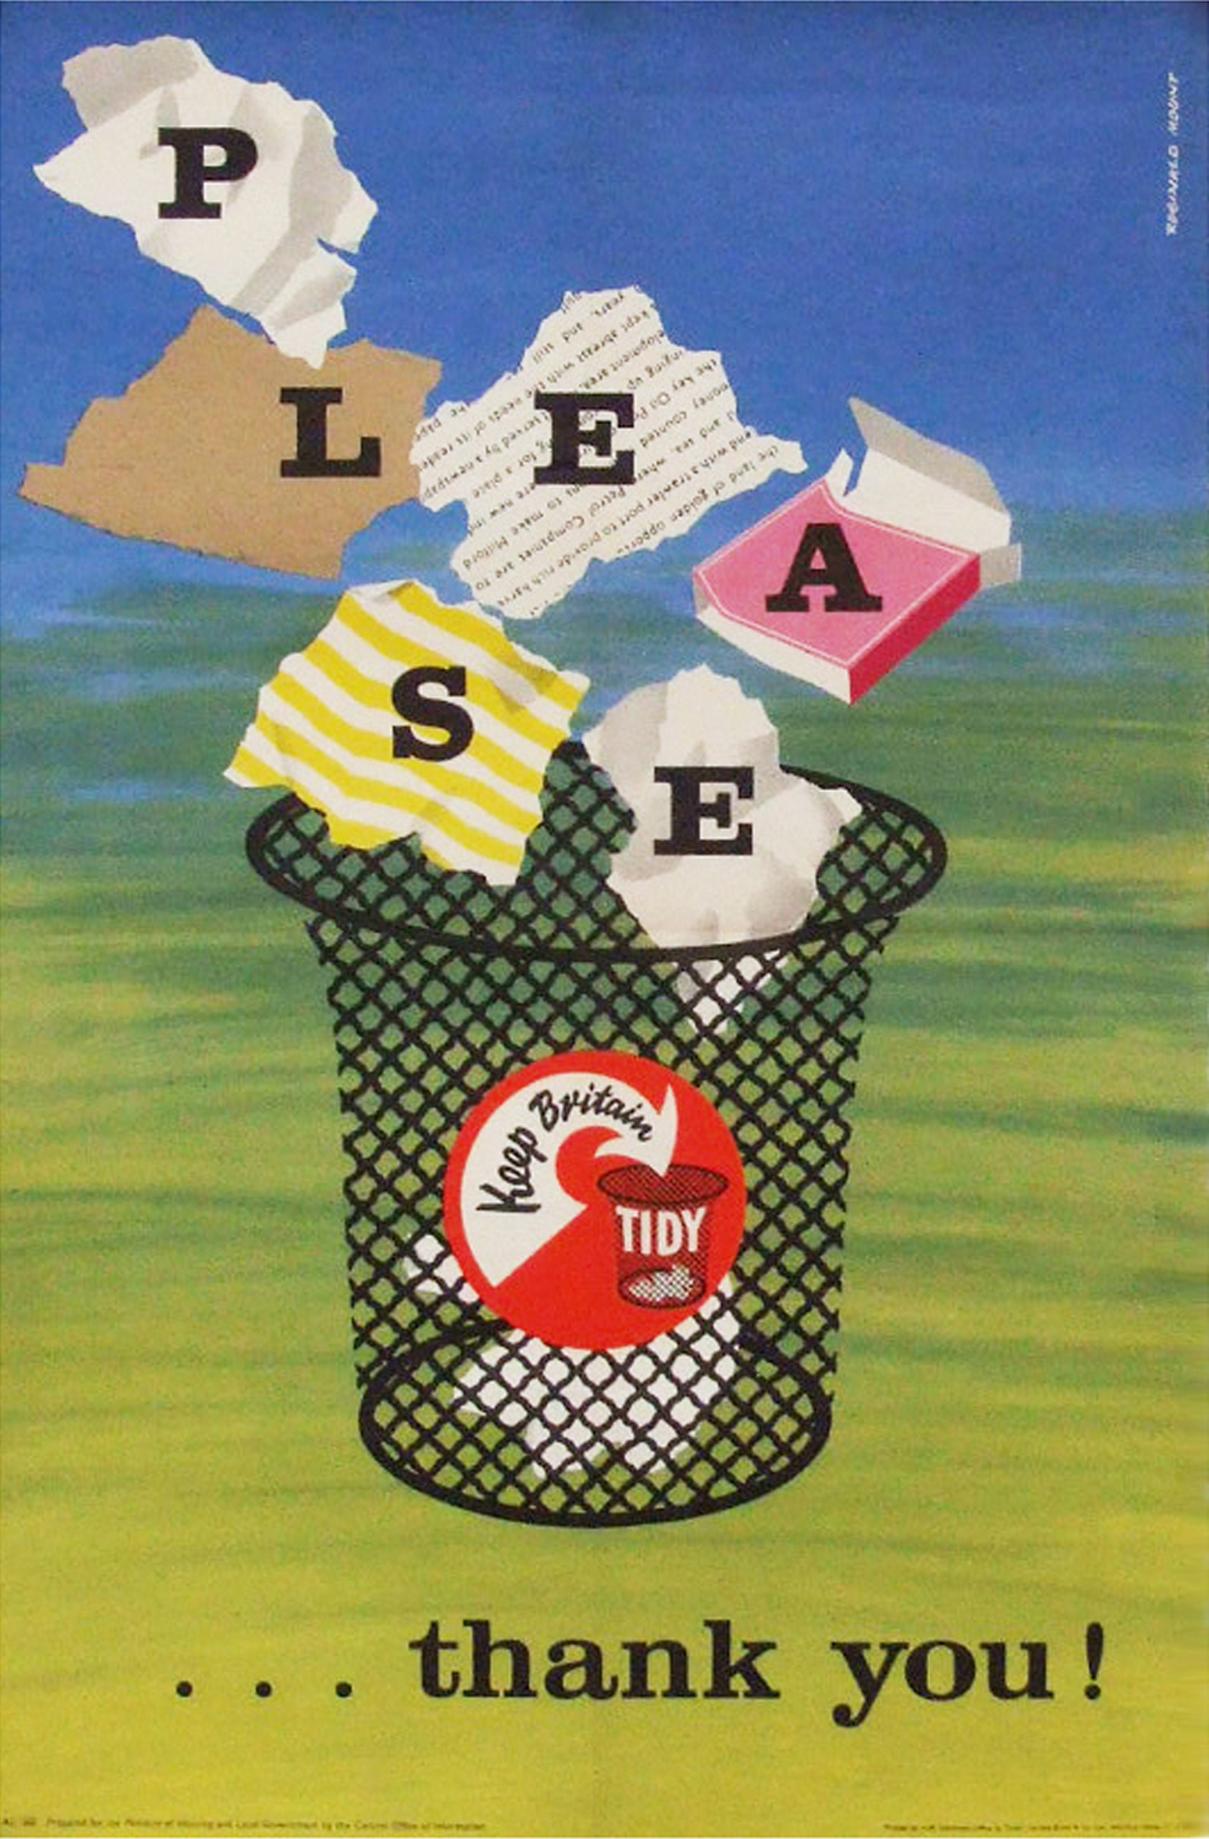 British Original 1950s Keep Britain Tidy Poster by Reginald Mount Recycle Trash For Sale